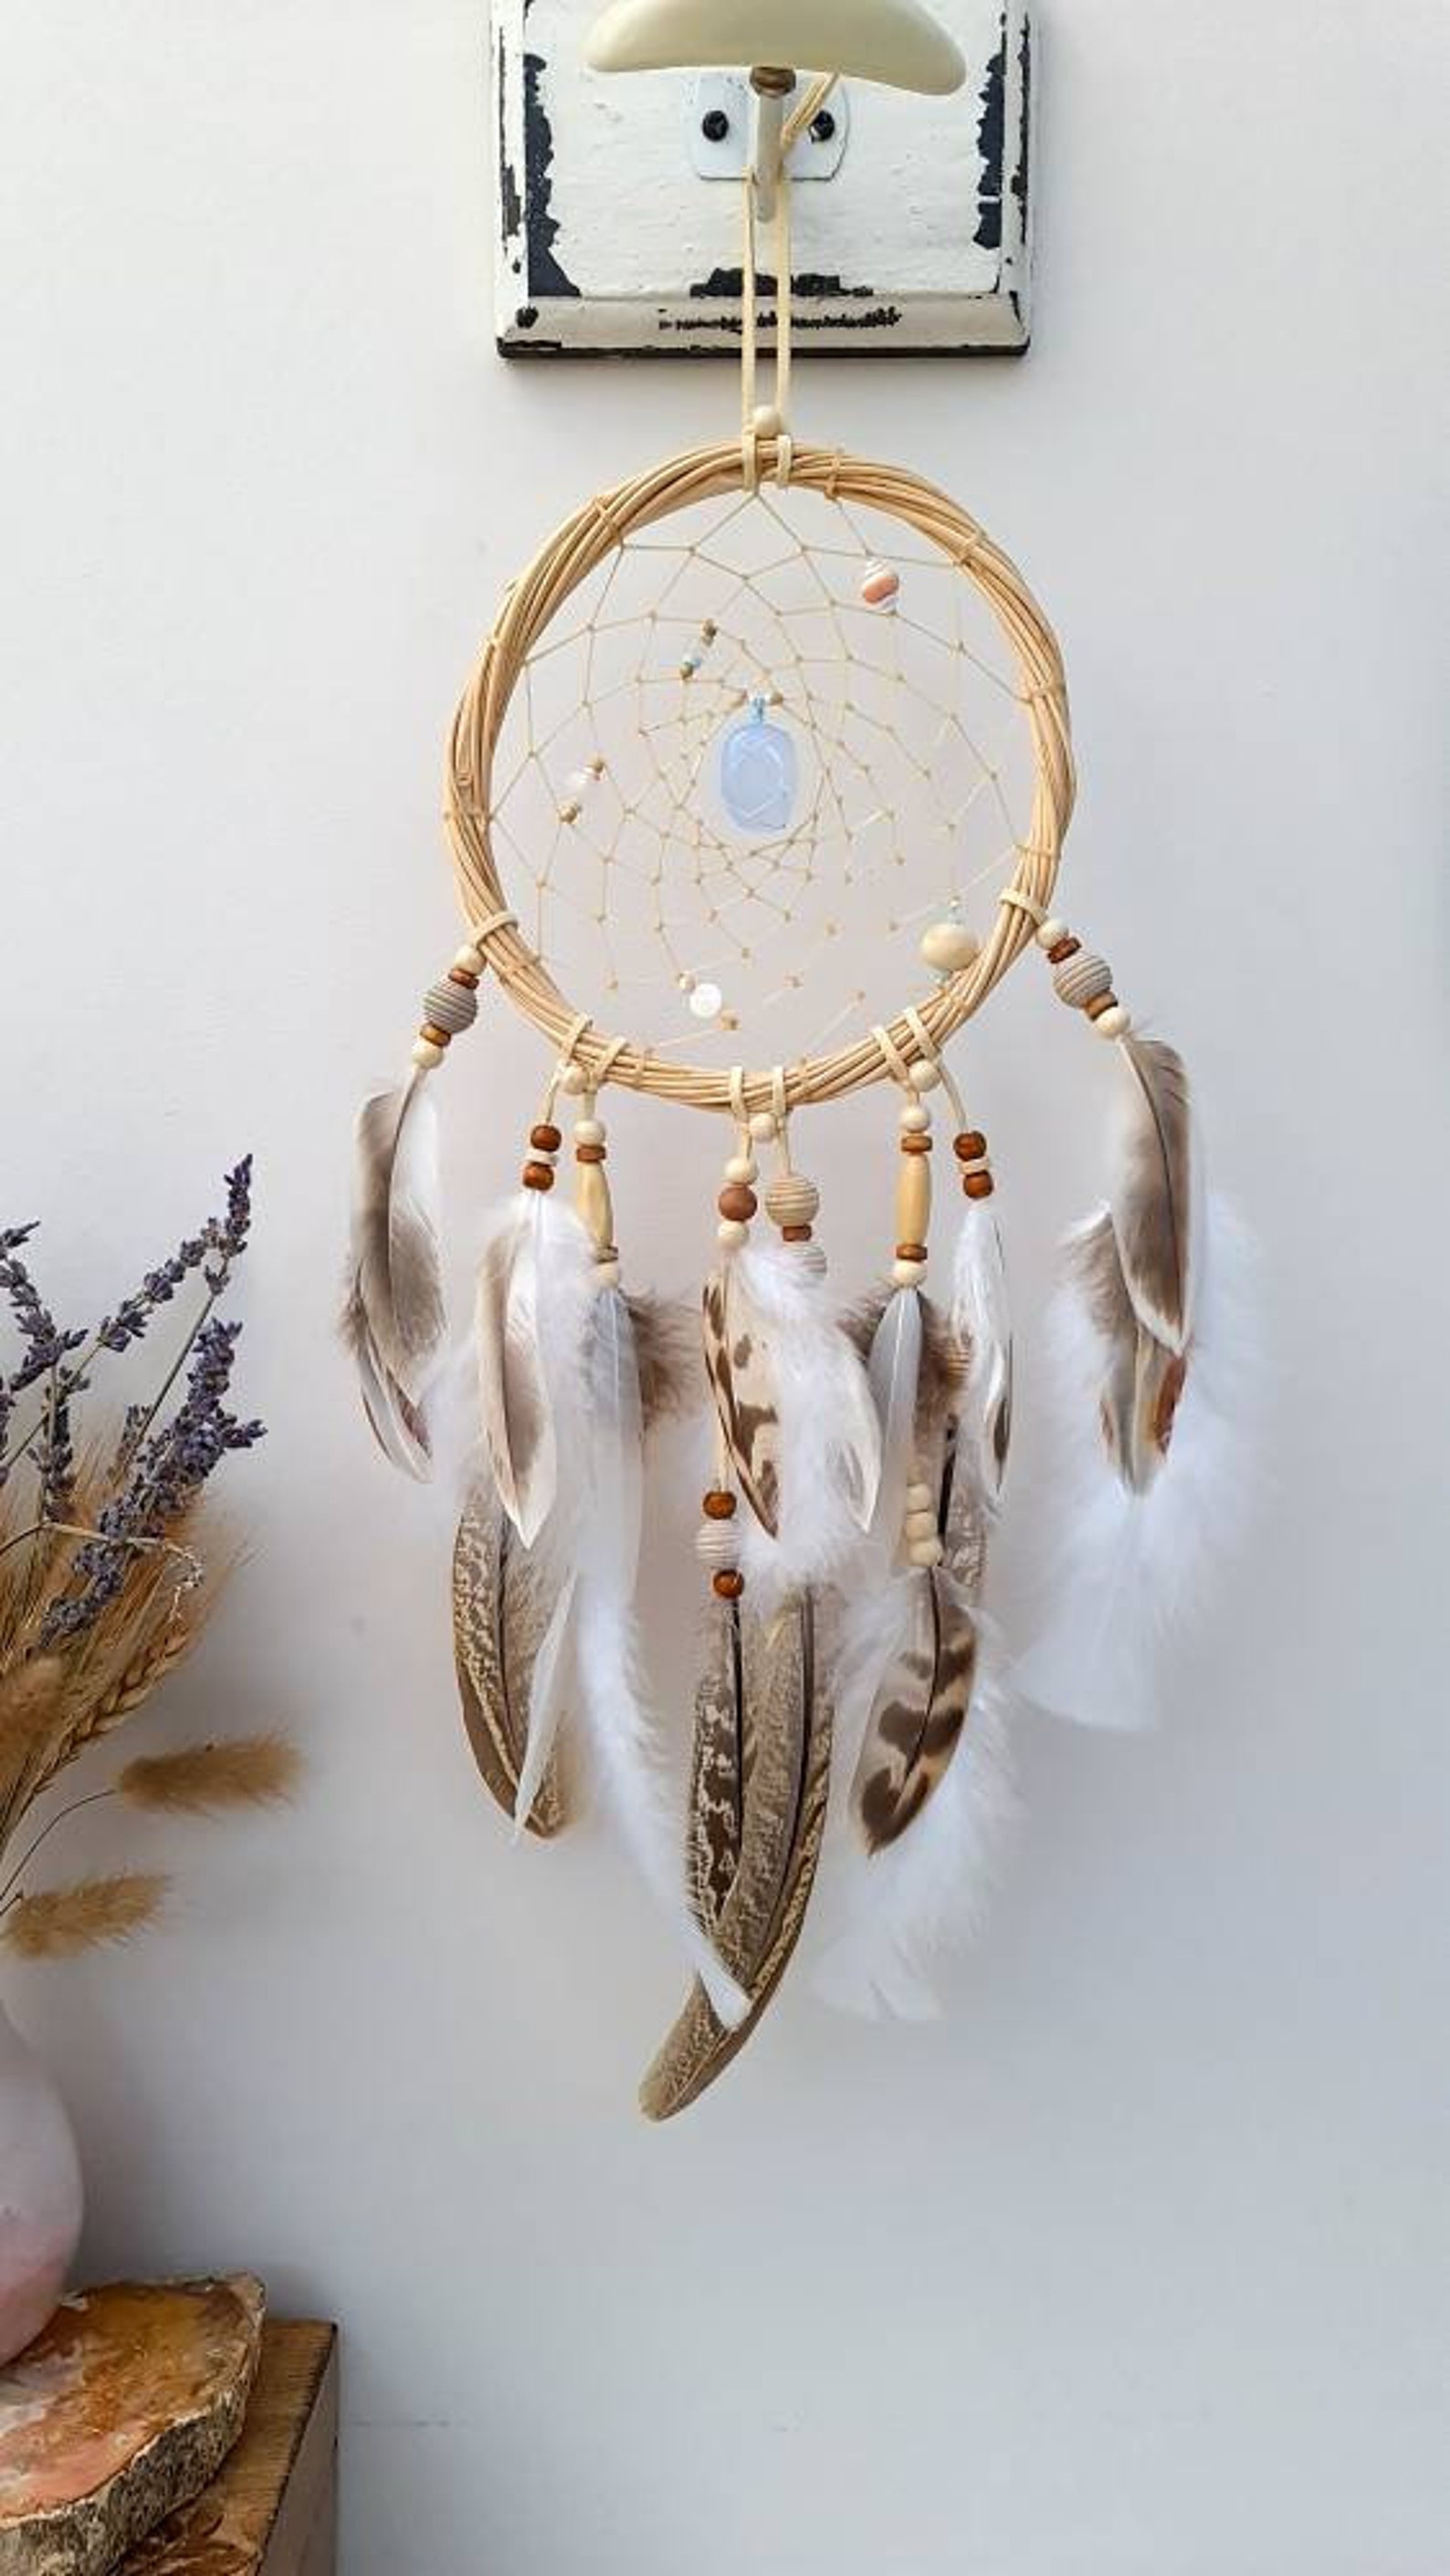 natural feathers and beads hanging from pale dreamcatcher frae with oval blue stone in the centre